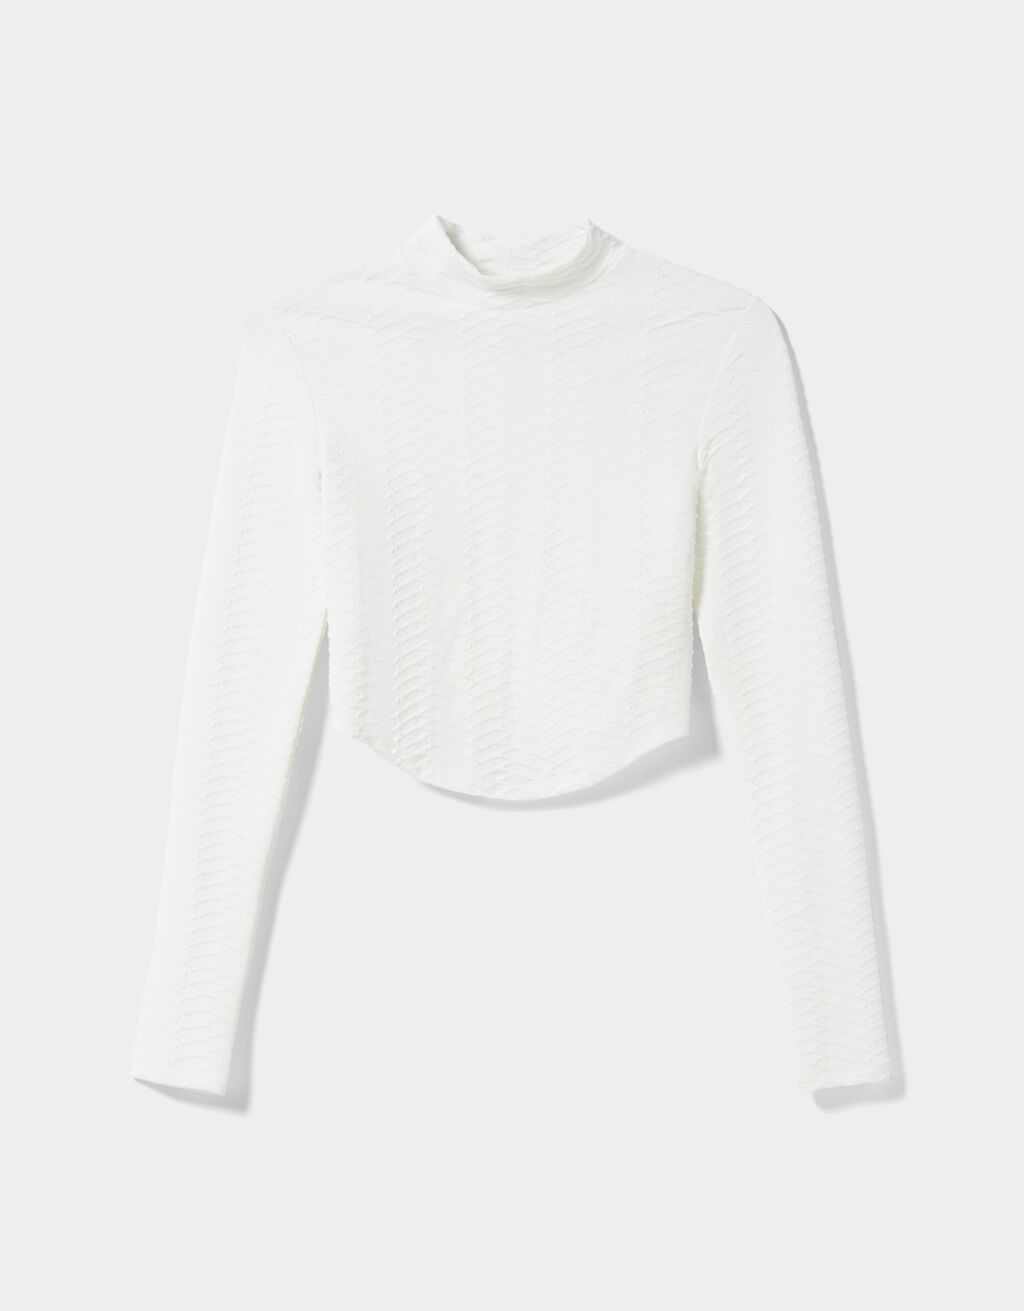 Textured T-shirt with long sleeves